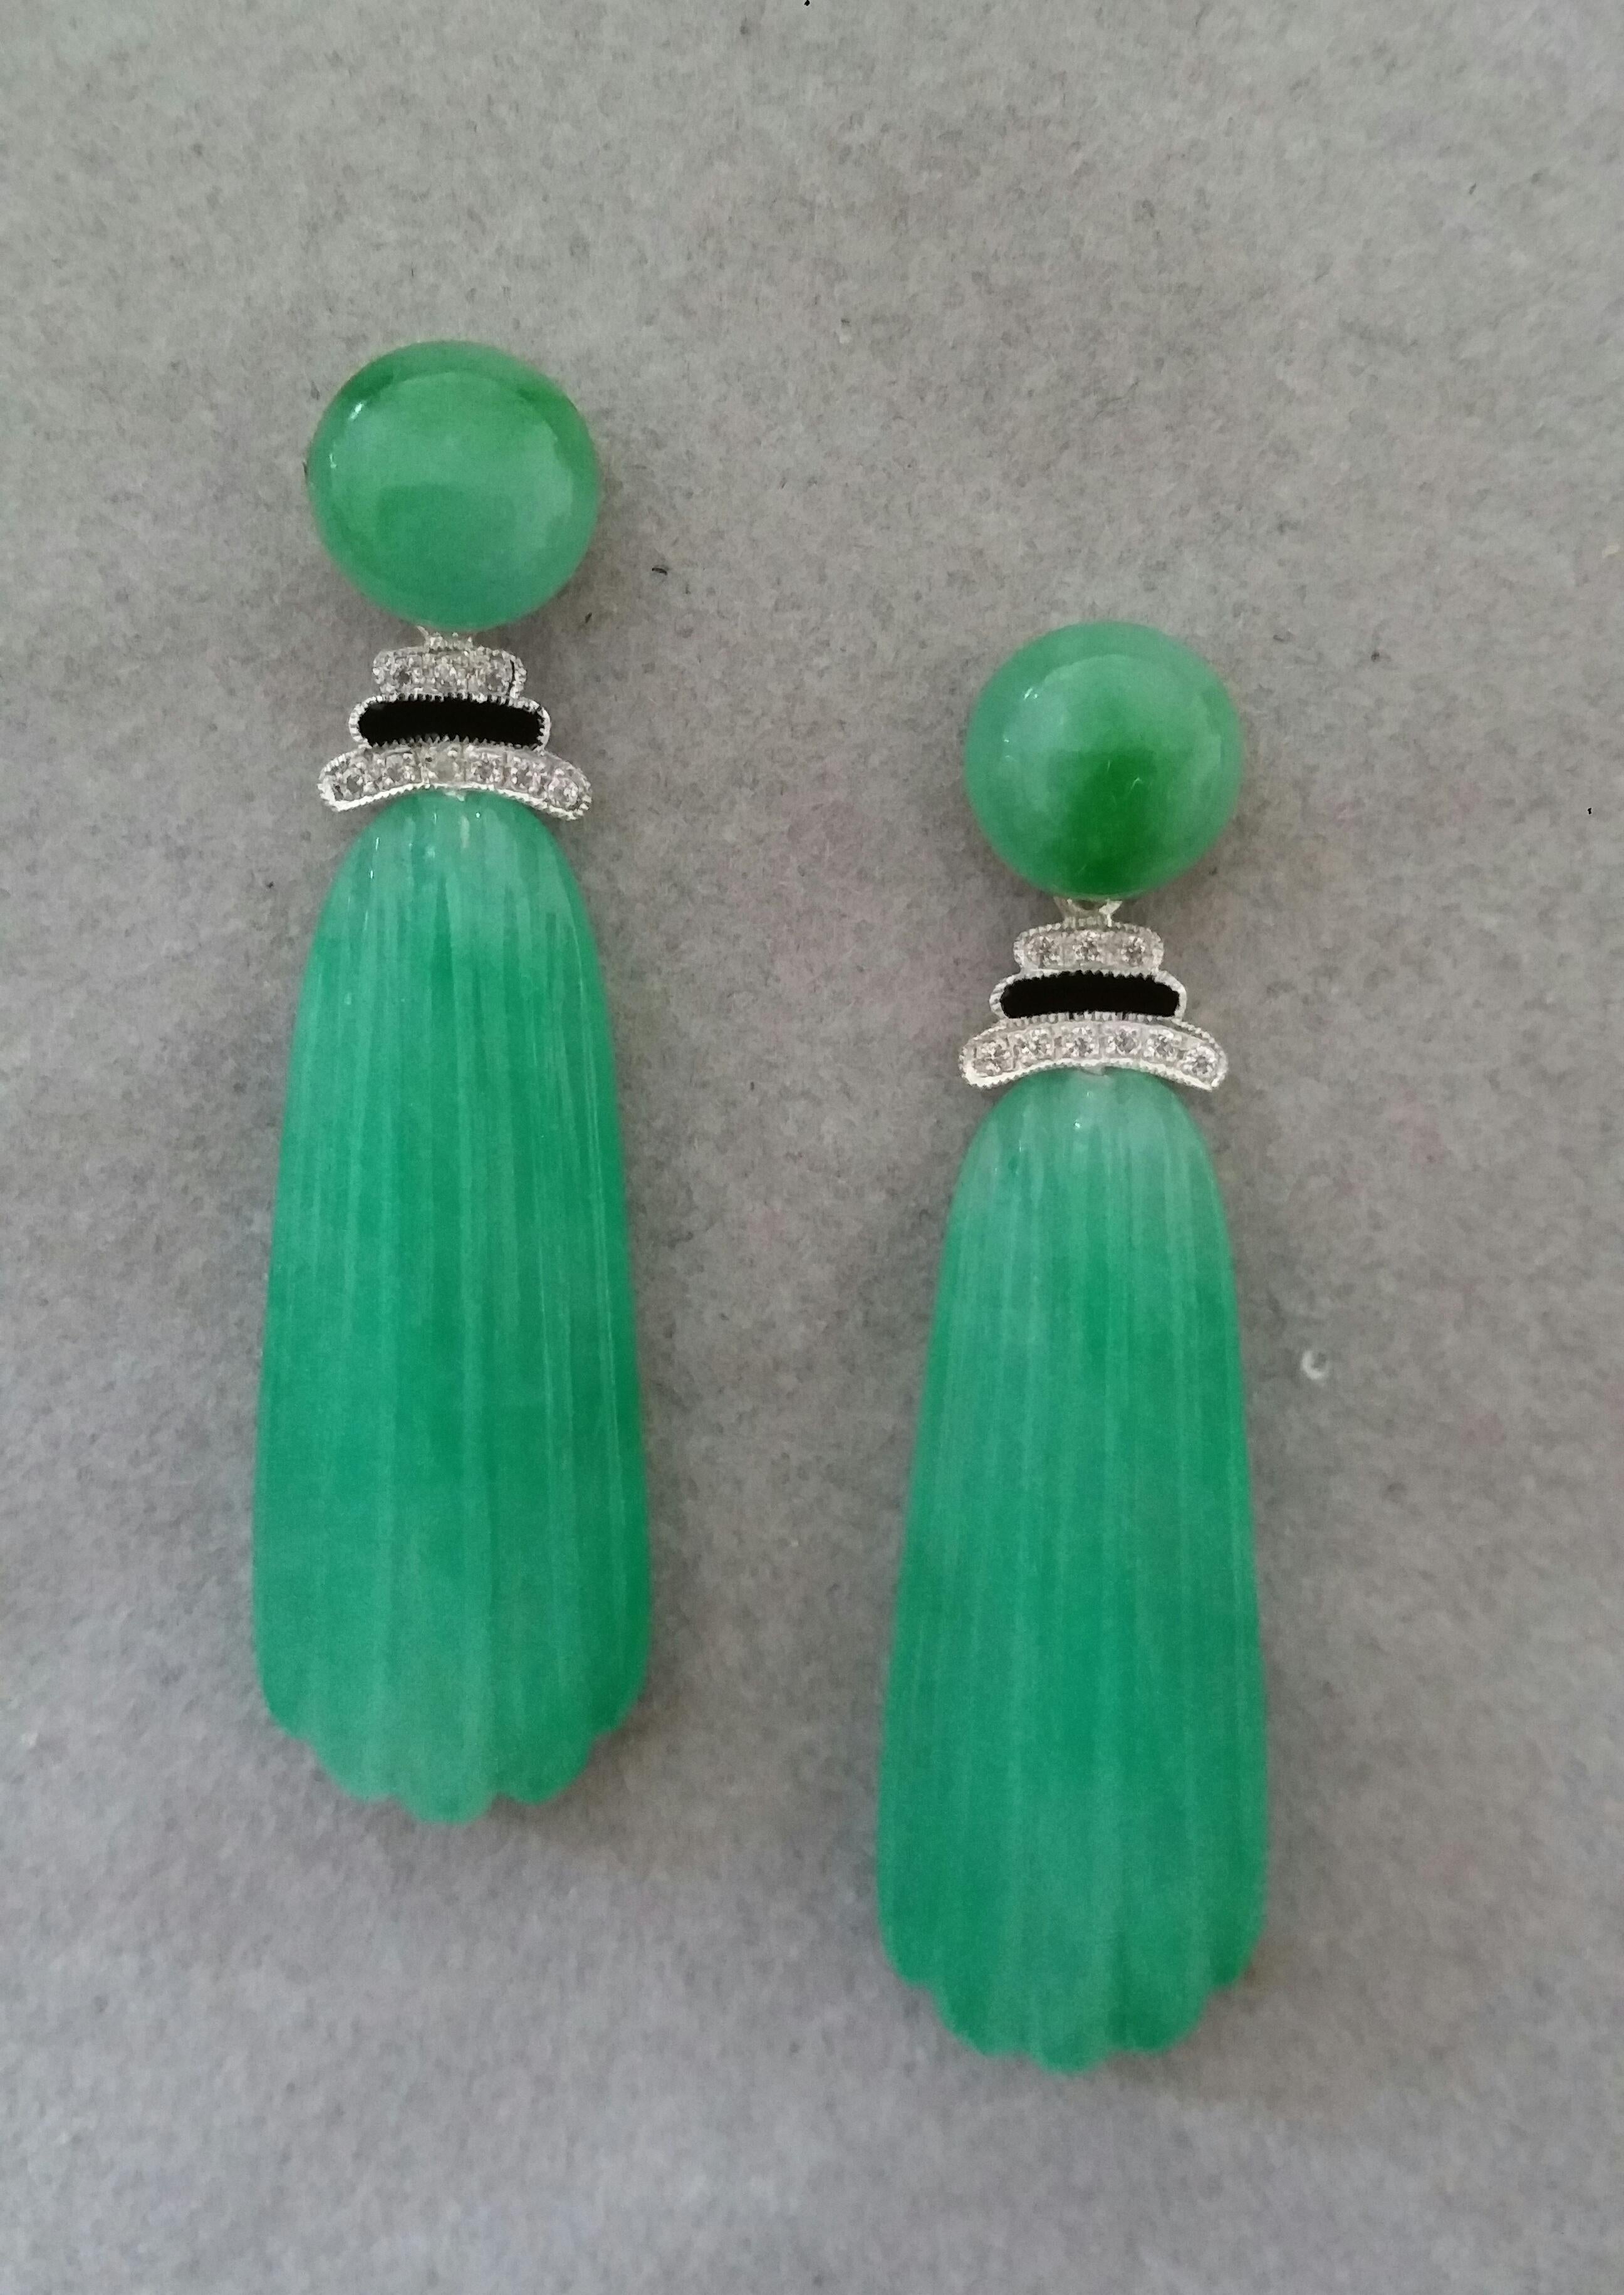 In these classic Art Deco Style earrings we have the tops with 2 round Jade buttons of 10 mm in diameter,the middle parts  are composed of 2 elements  in White Gold , Diamonds and Black Enamel,while in the bottom parts  we have 2  Burma Jade